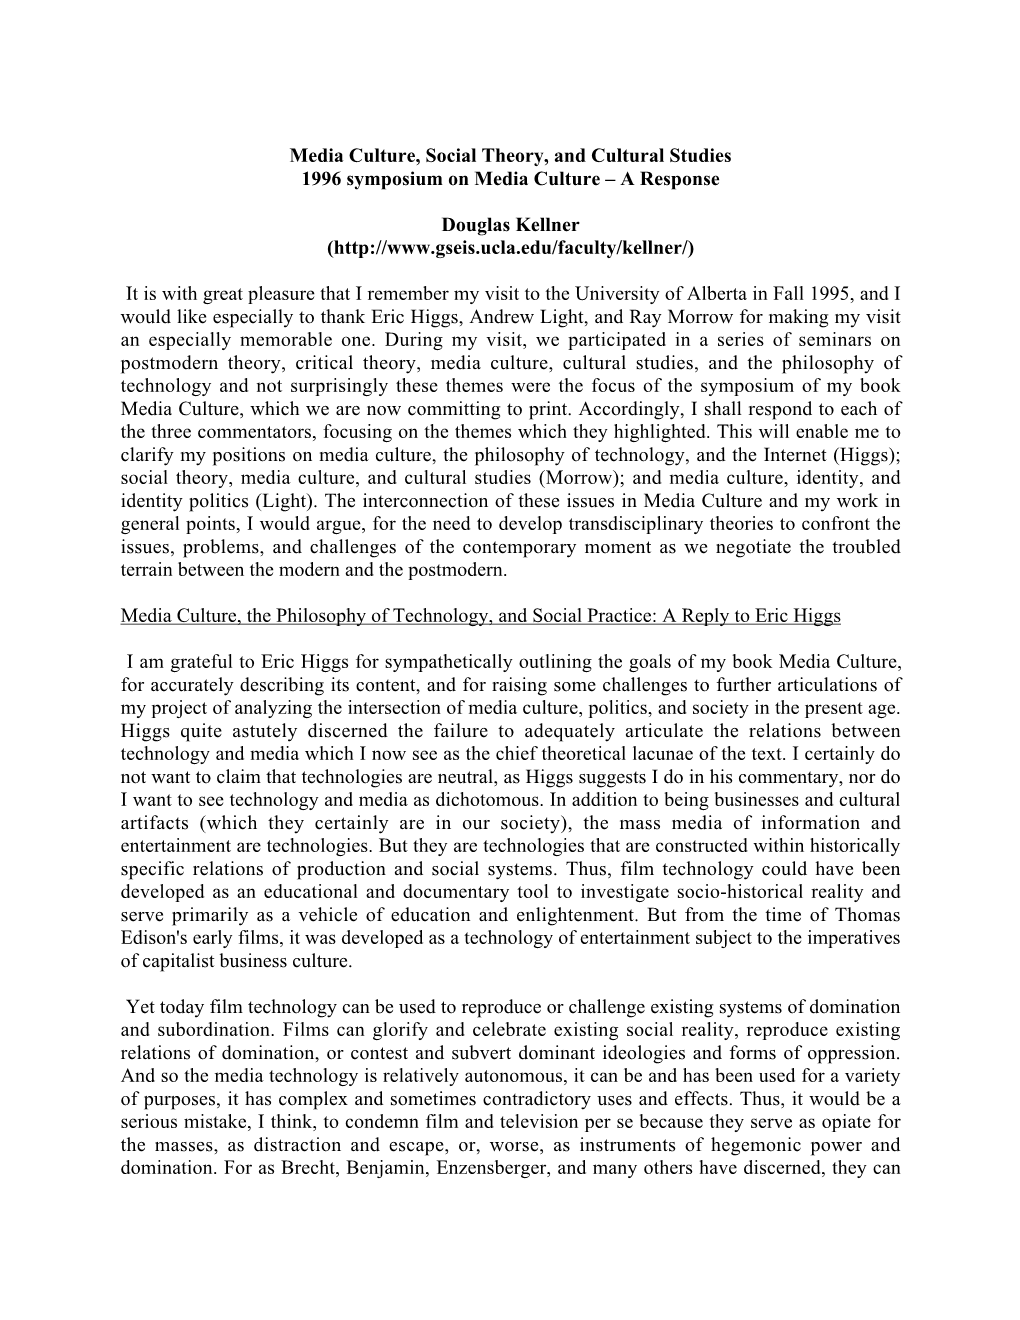 Media Culture, Social Theory, and Cultural Studies 1996 Symposium on Media Culture – a Response